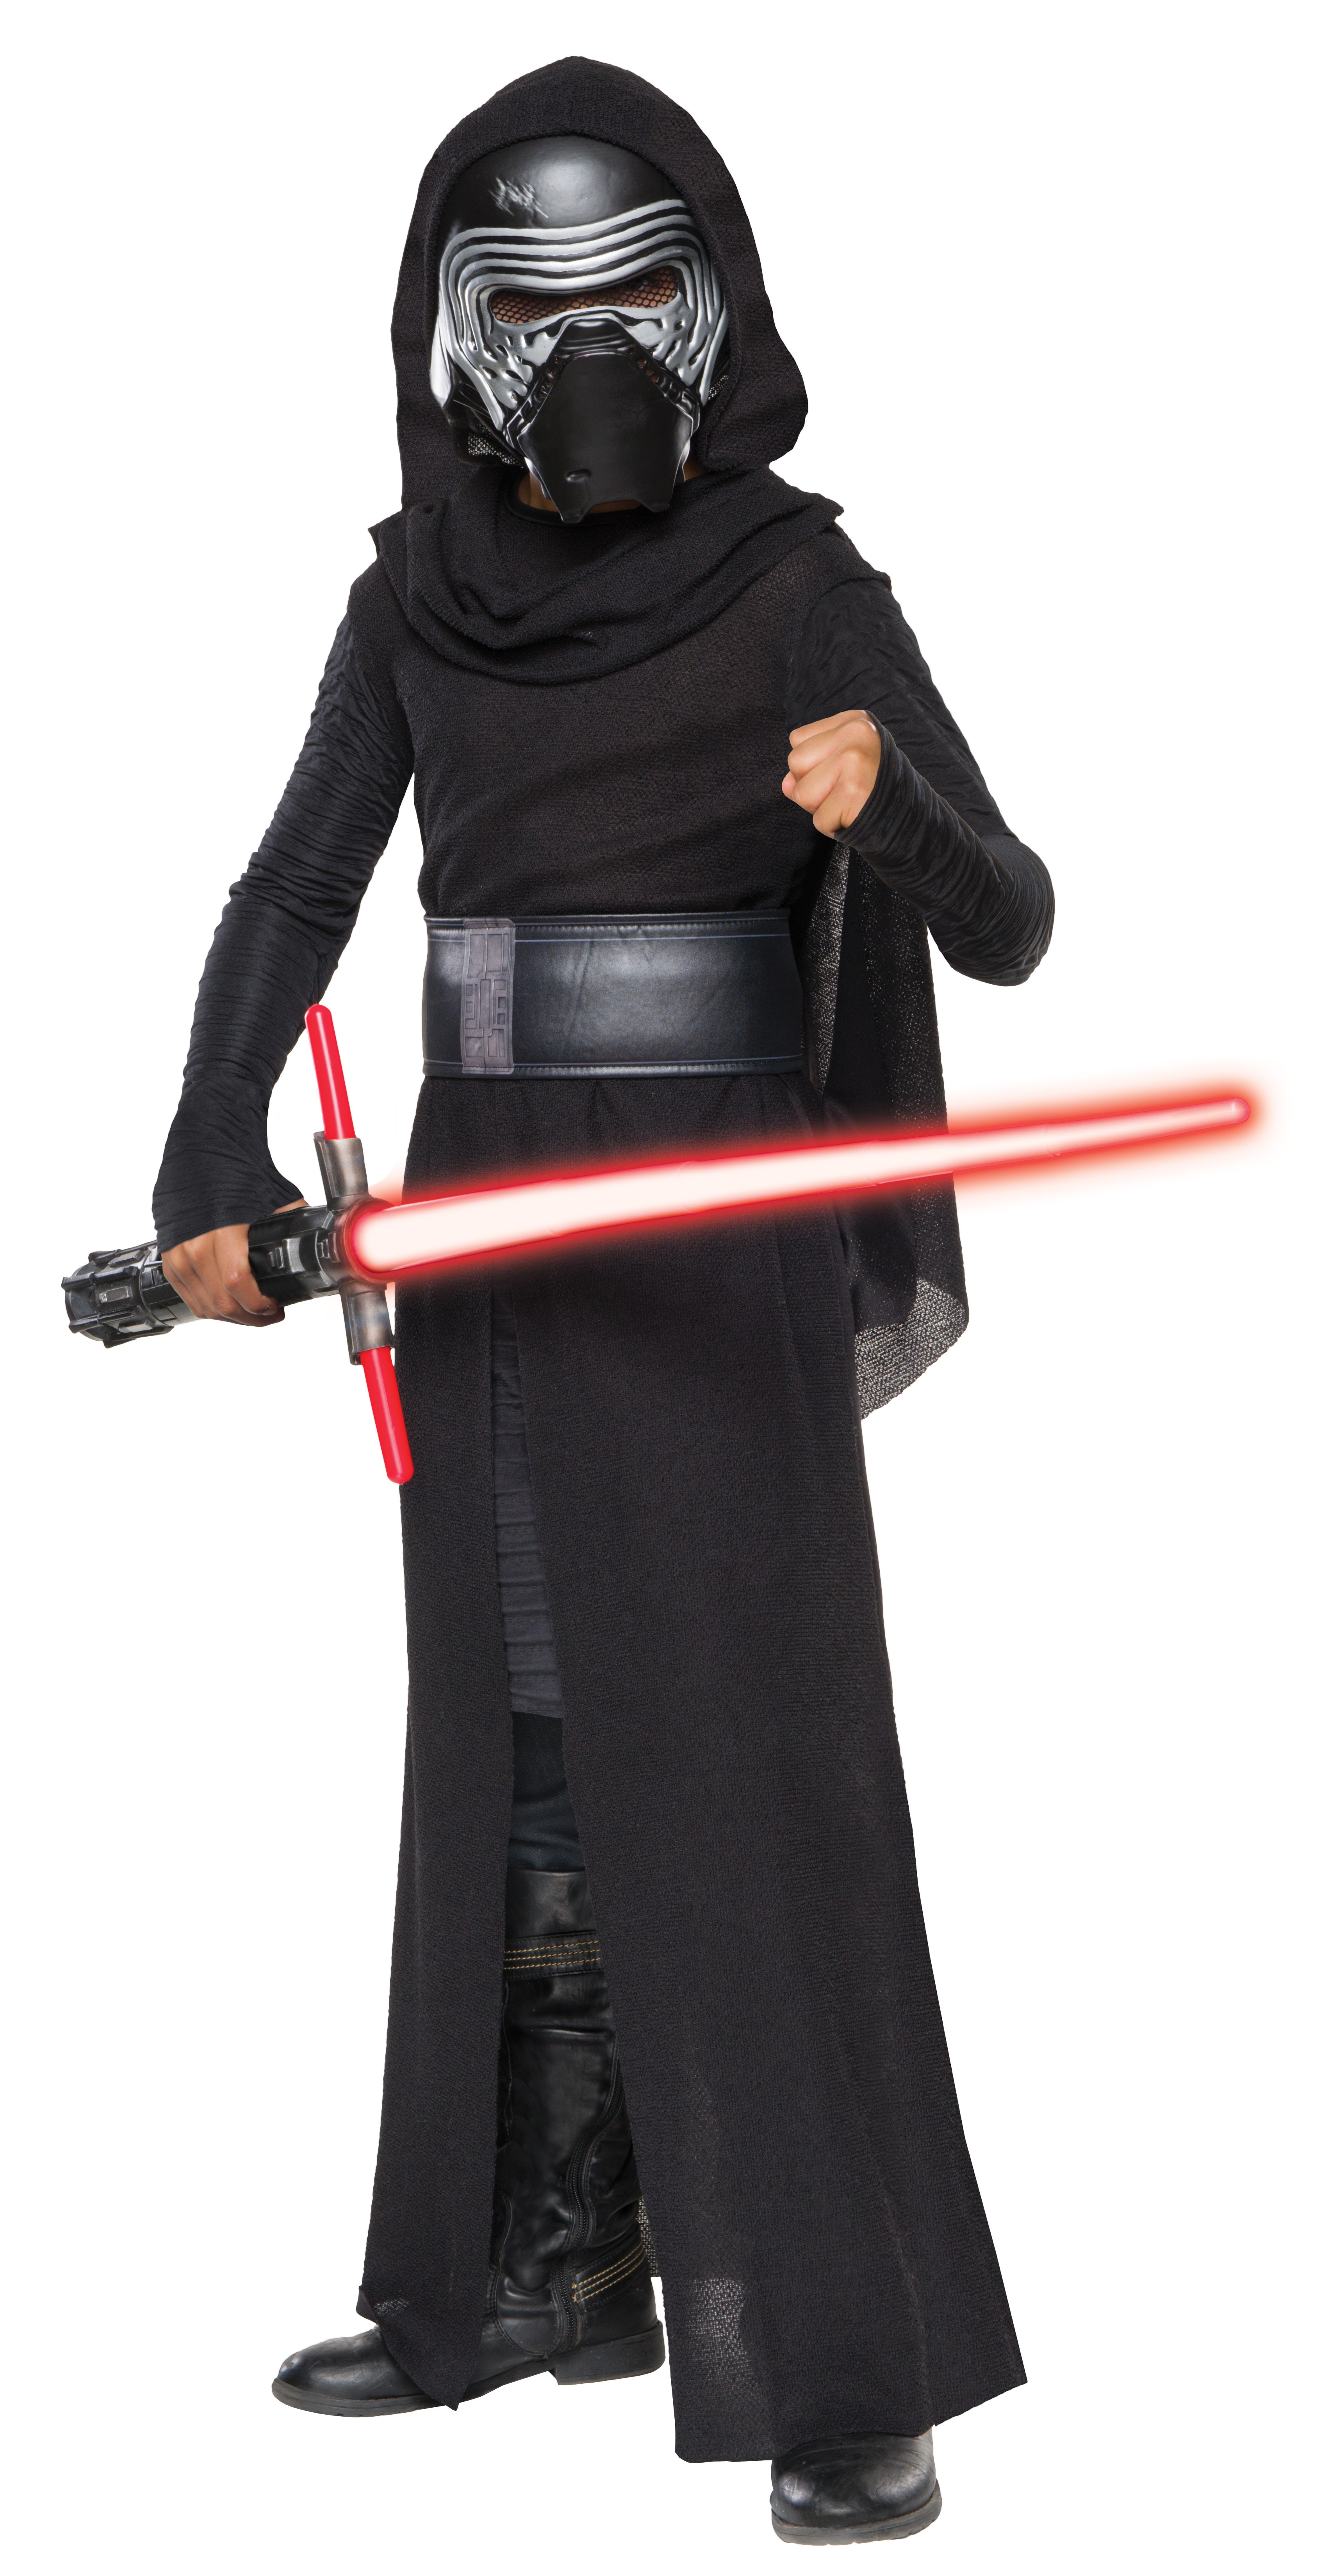 Star Wars Force Awakens Kylo Ren Child Deluxe Costume Size S,M,L - Click Image to Close